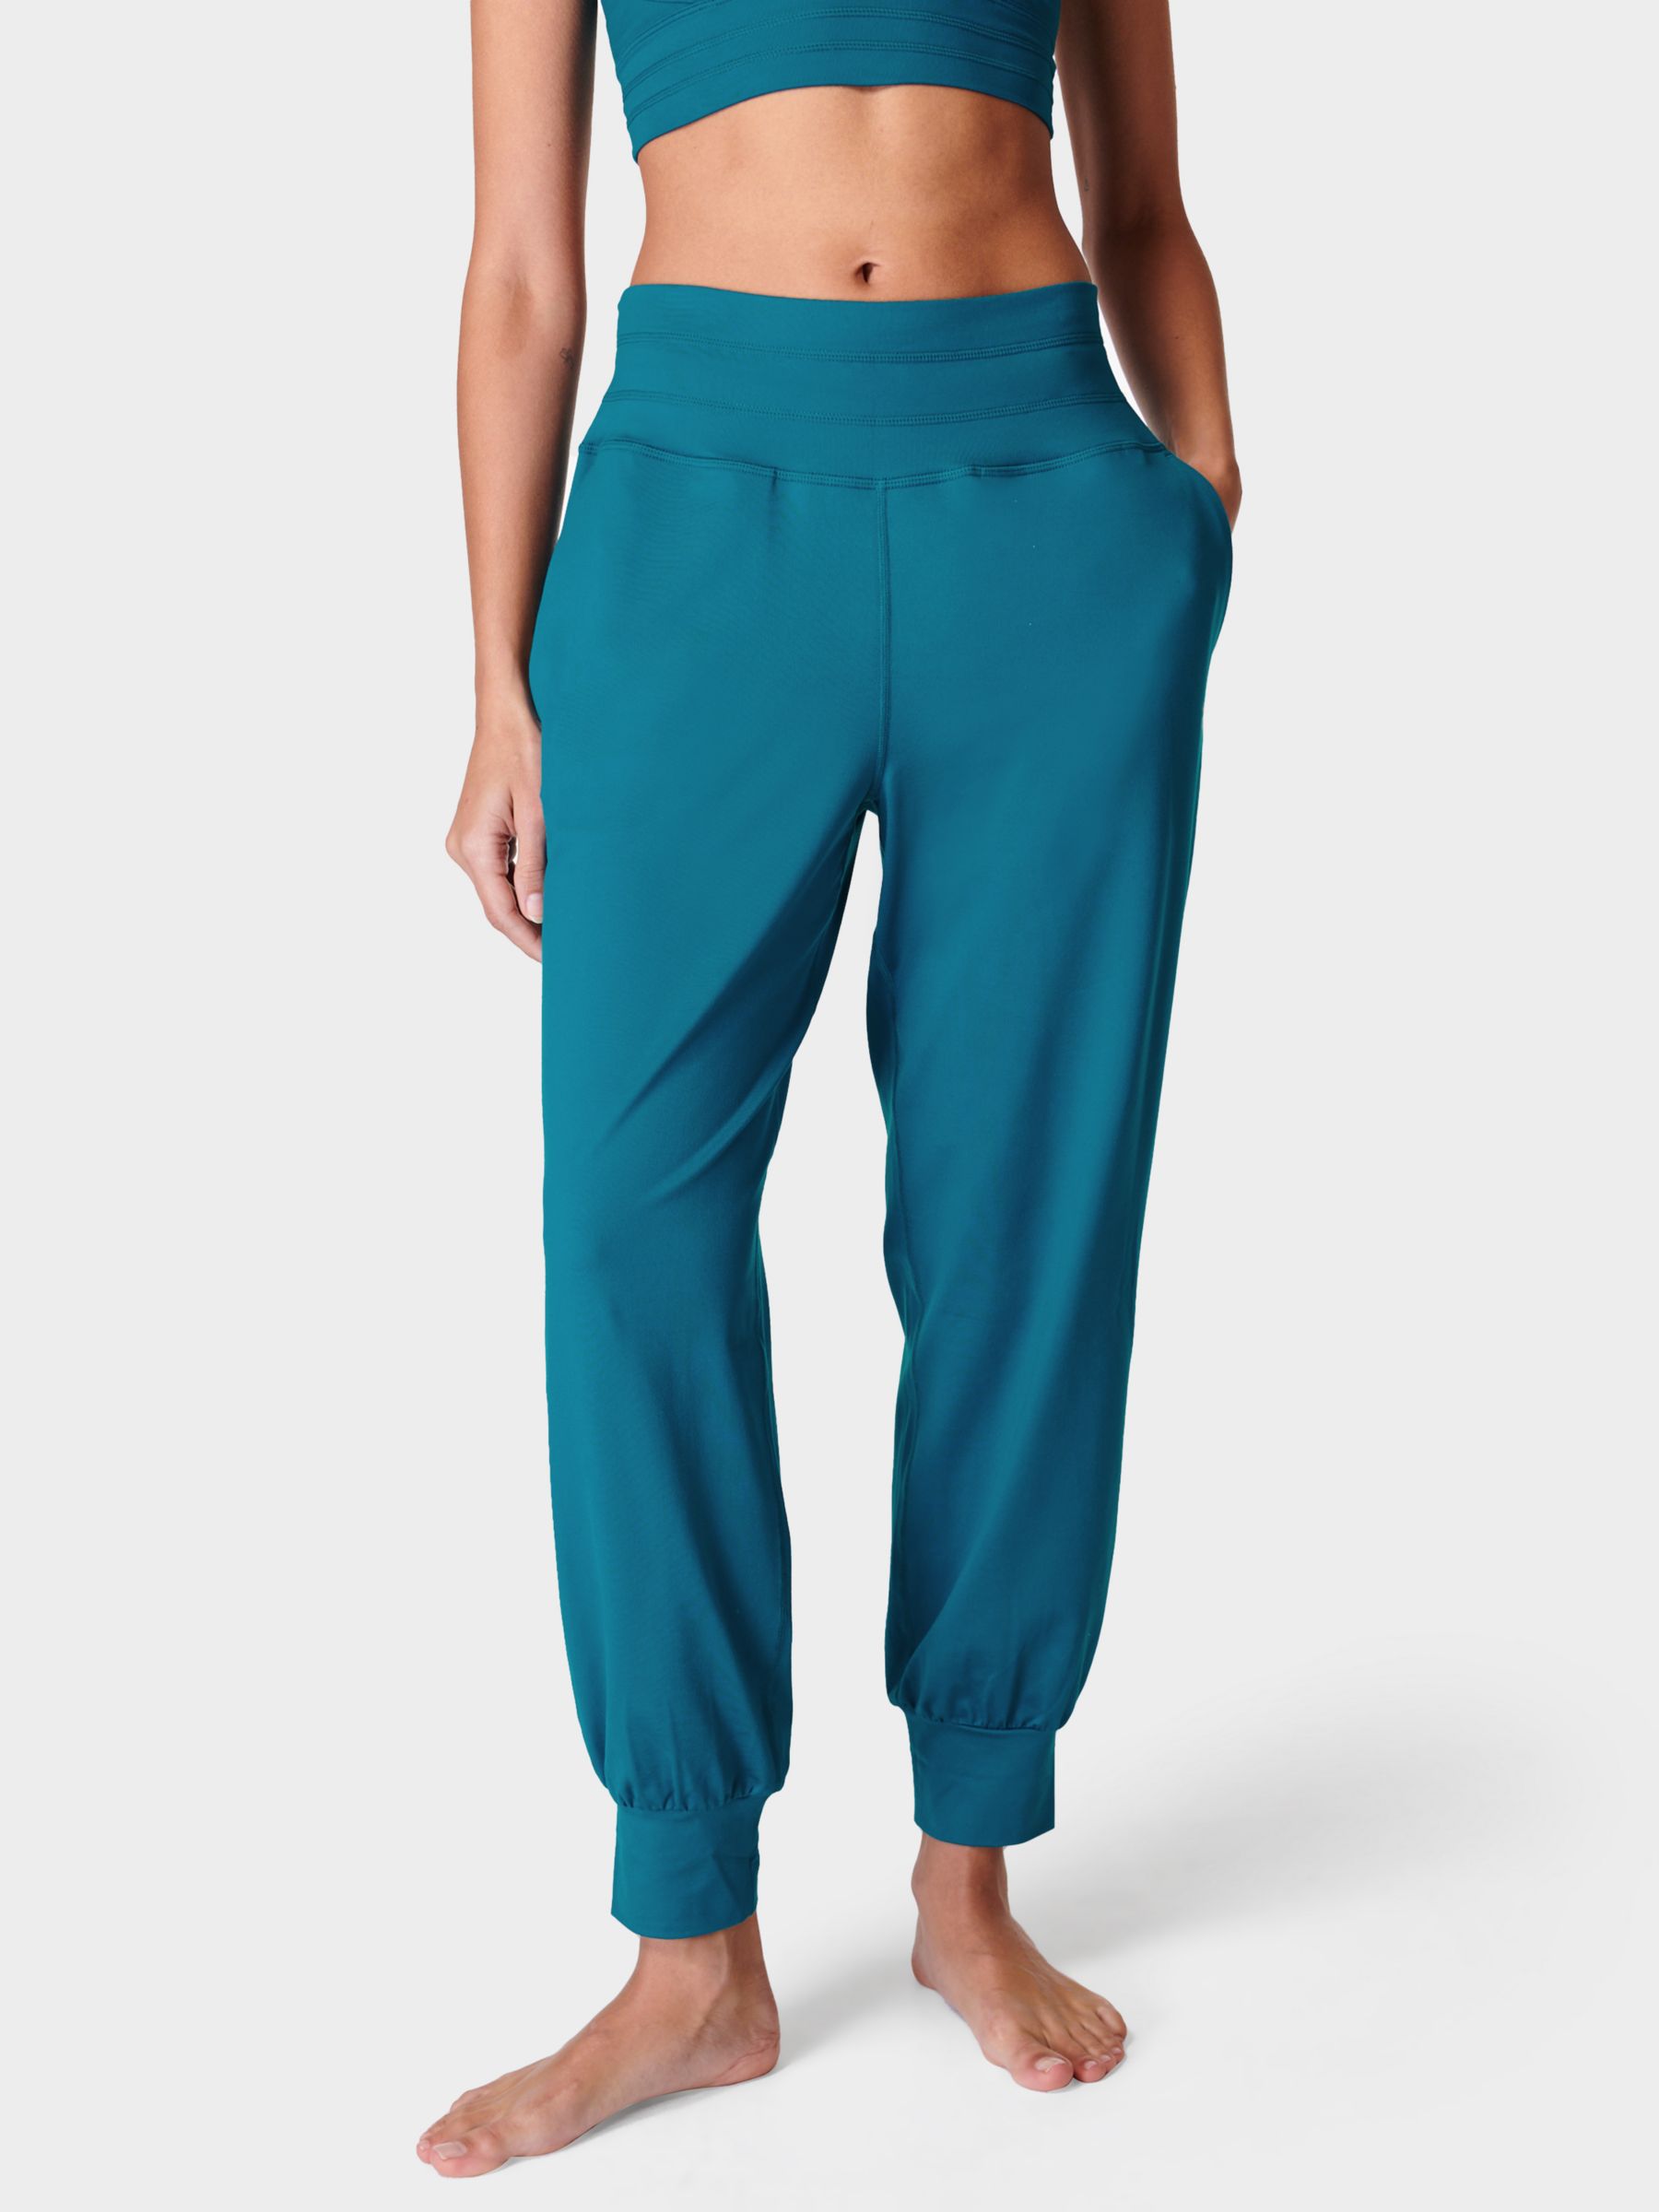 Pieces Betty High Waist Jeggings in Teal